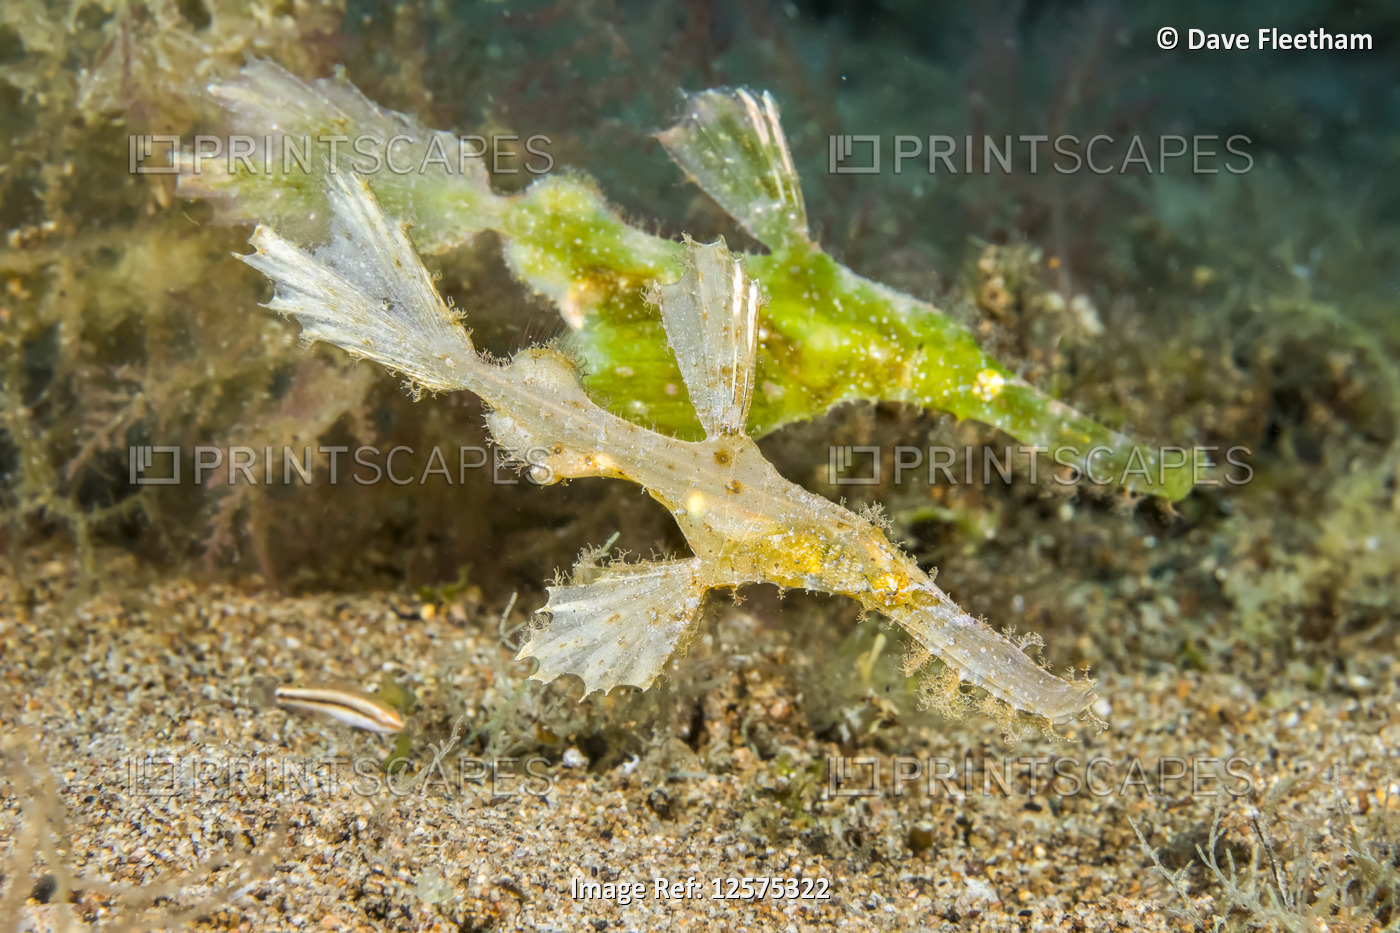 The male roughsnout ghost pipefish (Solenostomus paegnius) is pictured here in ...